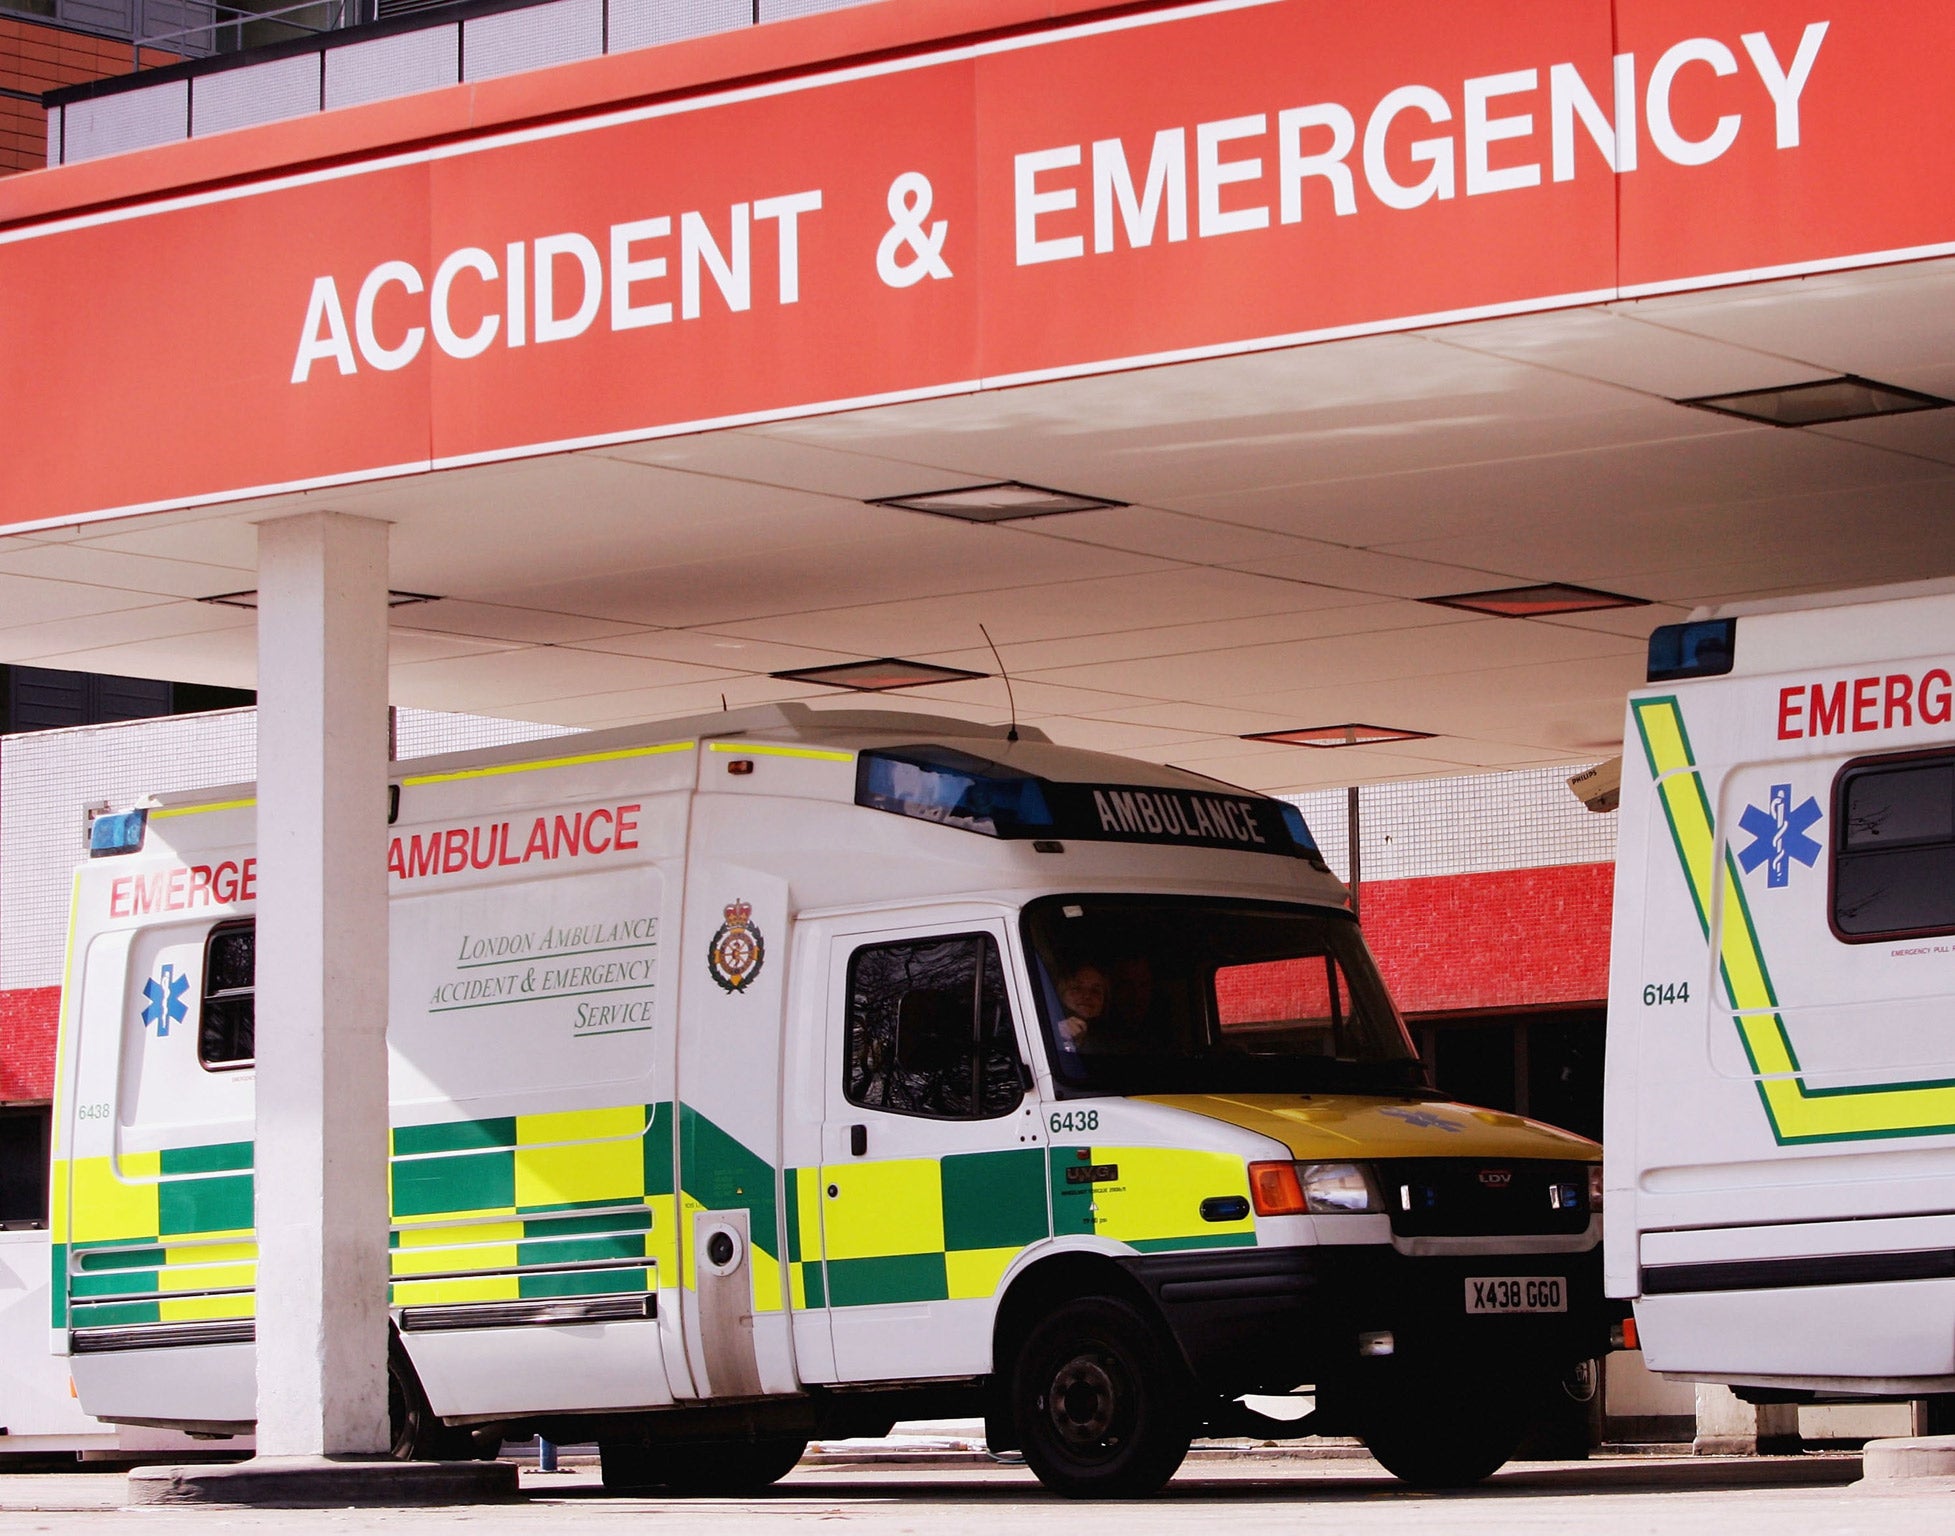 Doctors have warned of a coming A&E crisis this winter